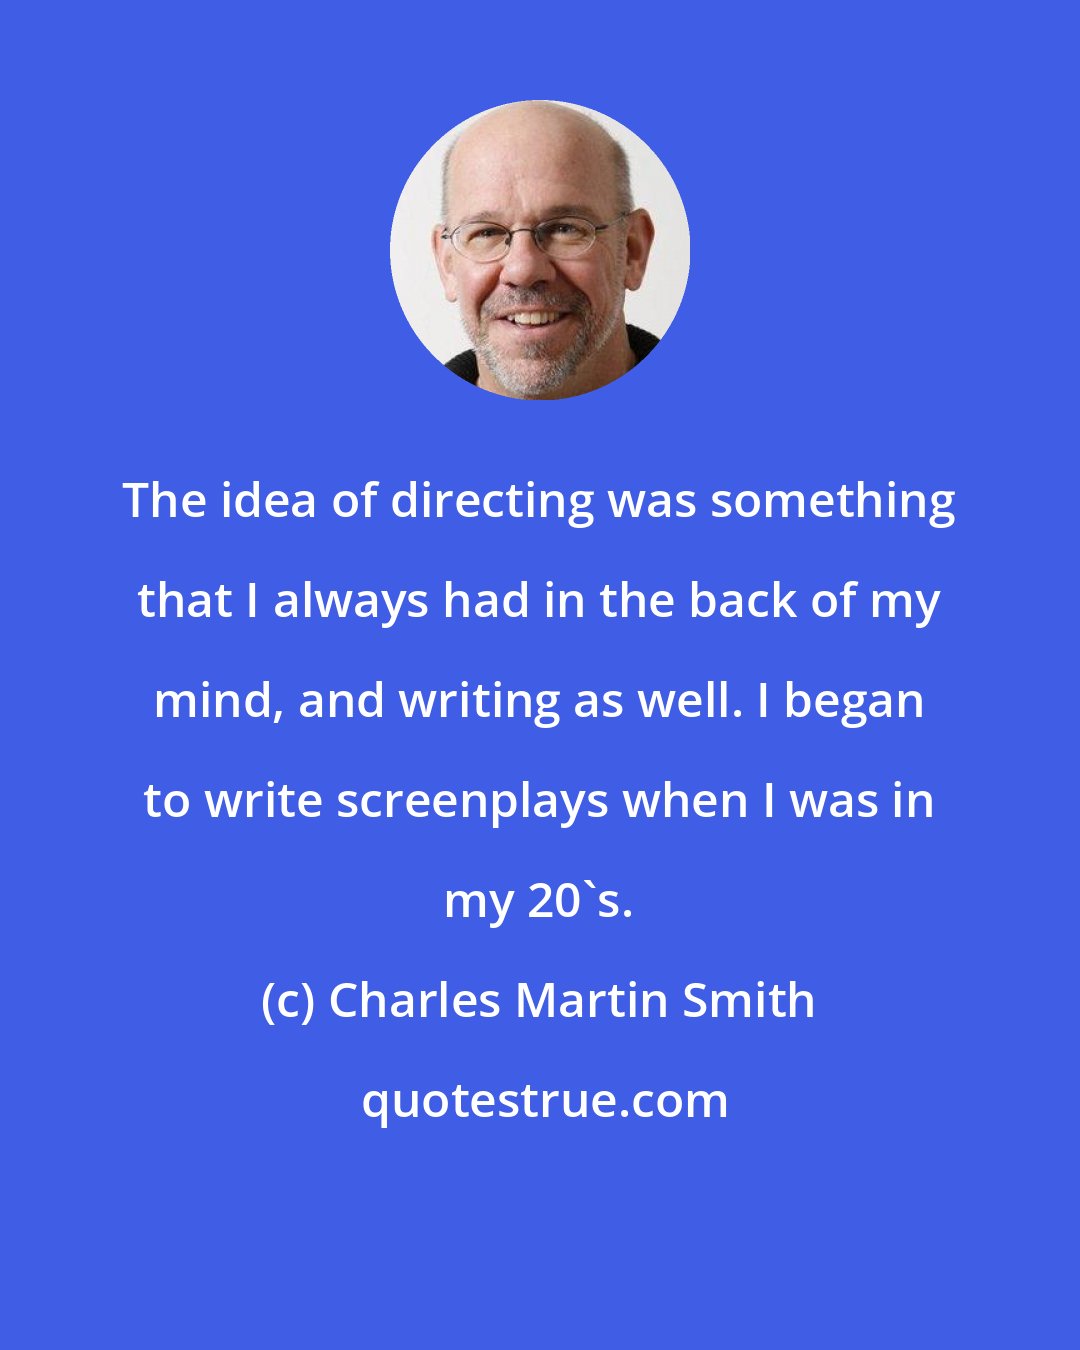 Charles Martin Smith: The idea of directing was something that I always had in the back of my mind, and writing as well. I began to write screenplays when I was in my 20's.